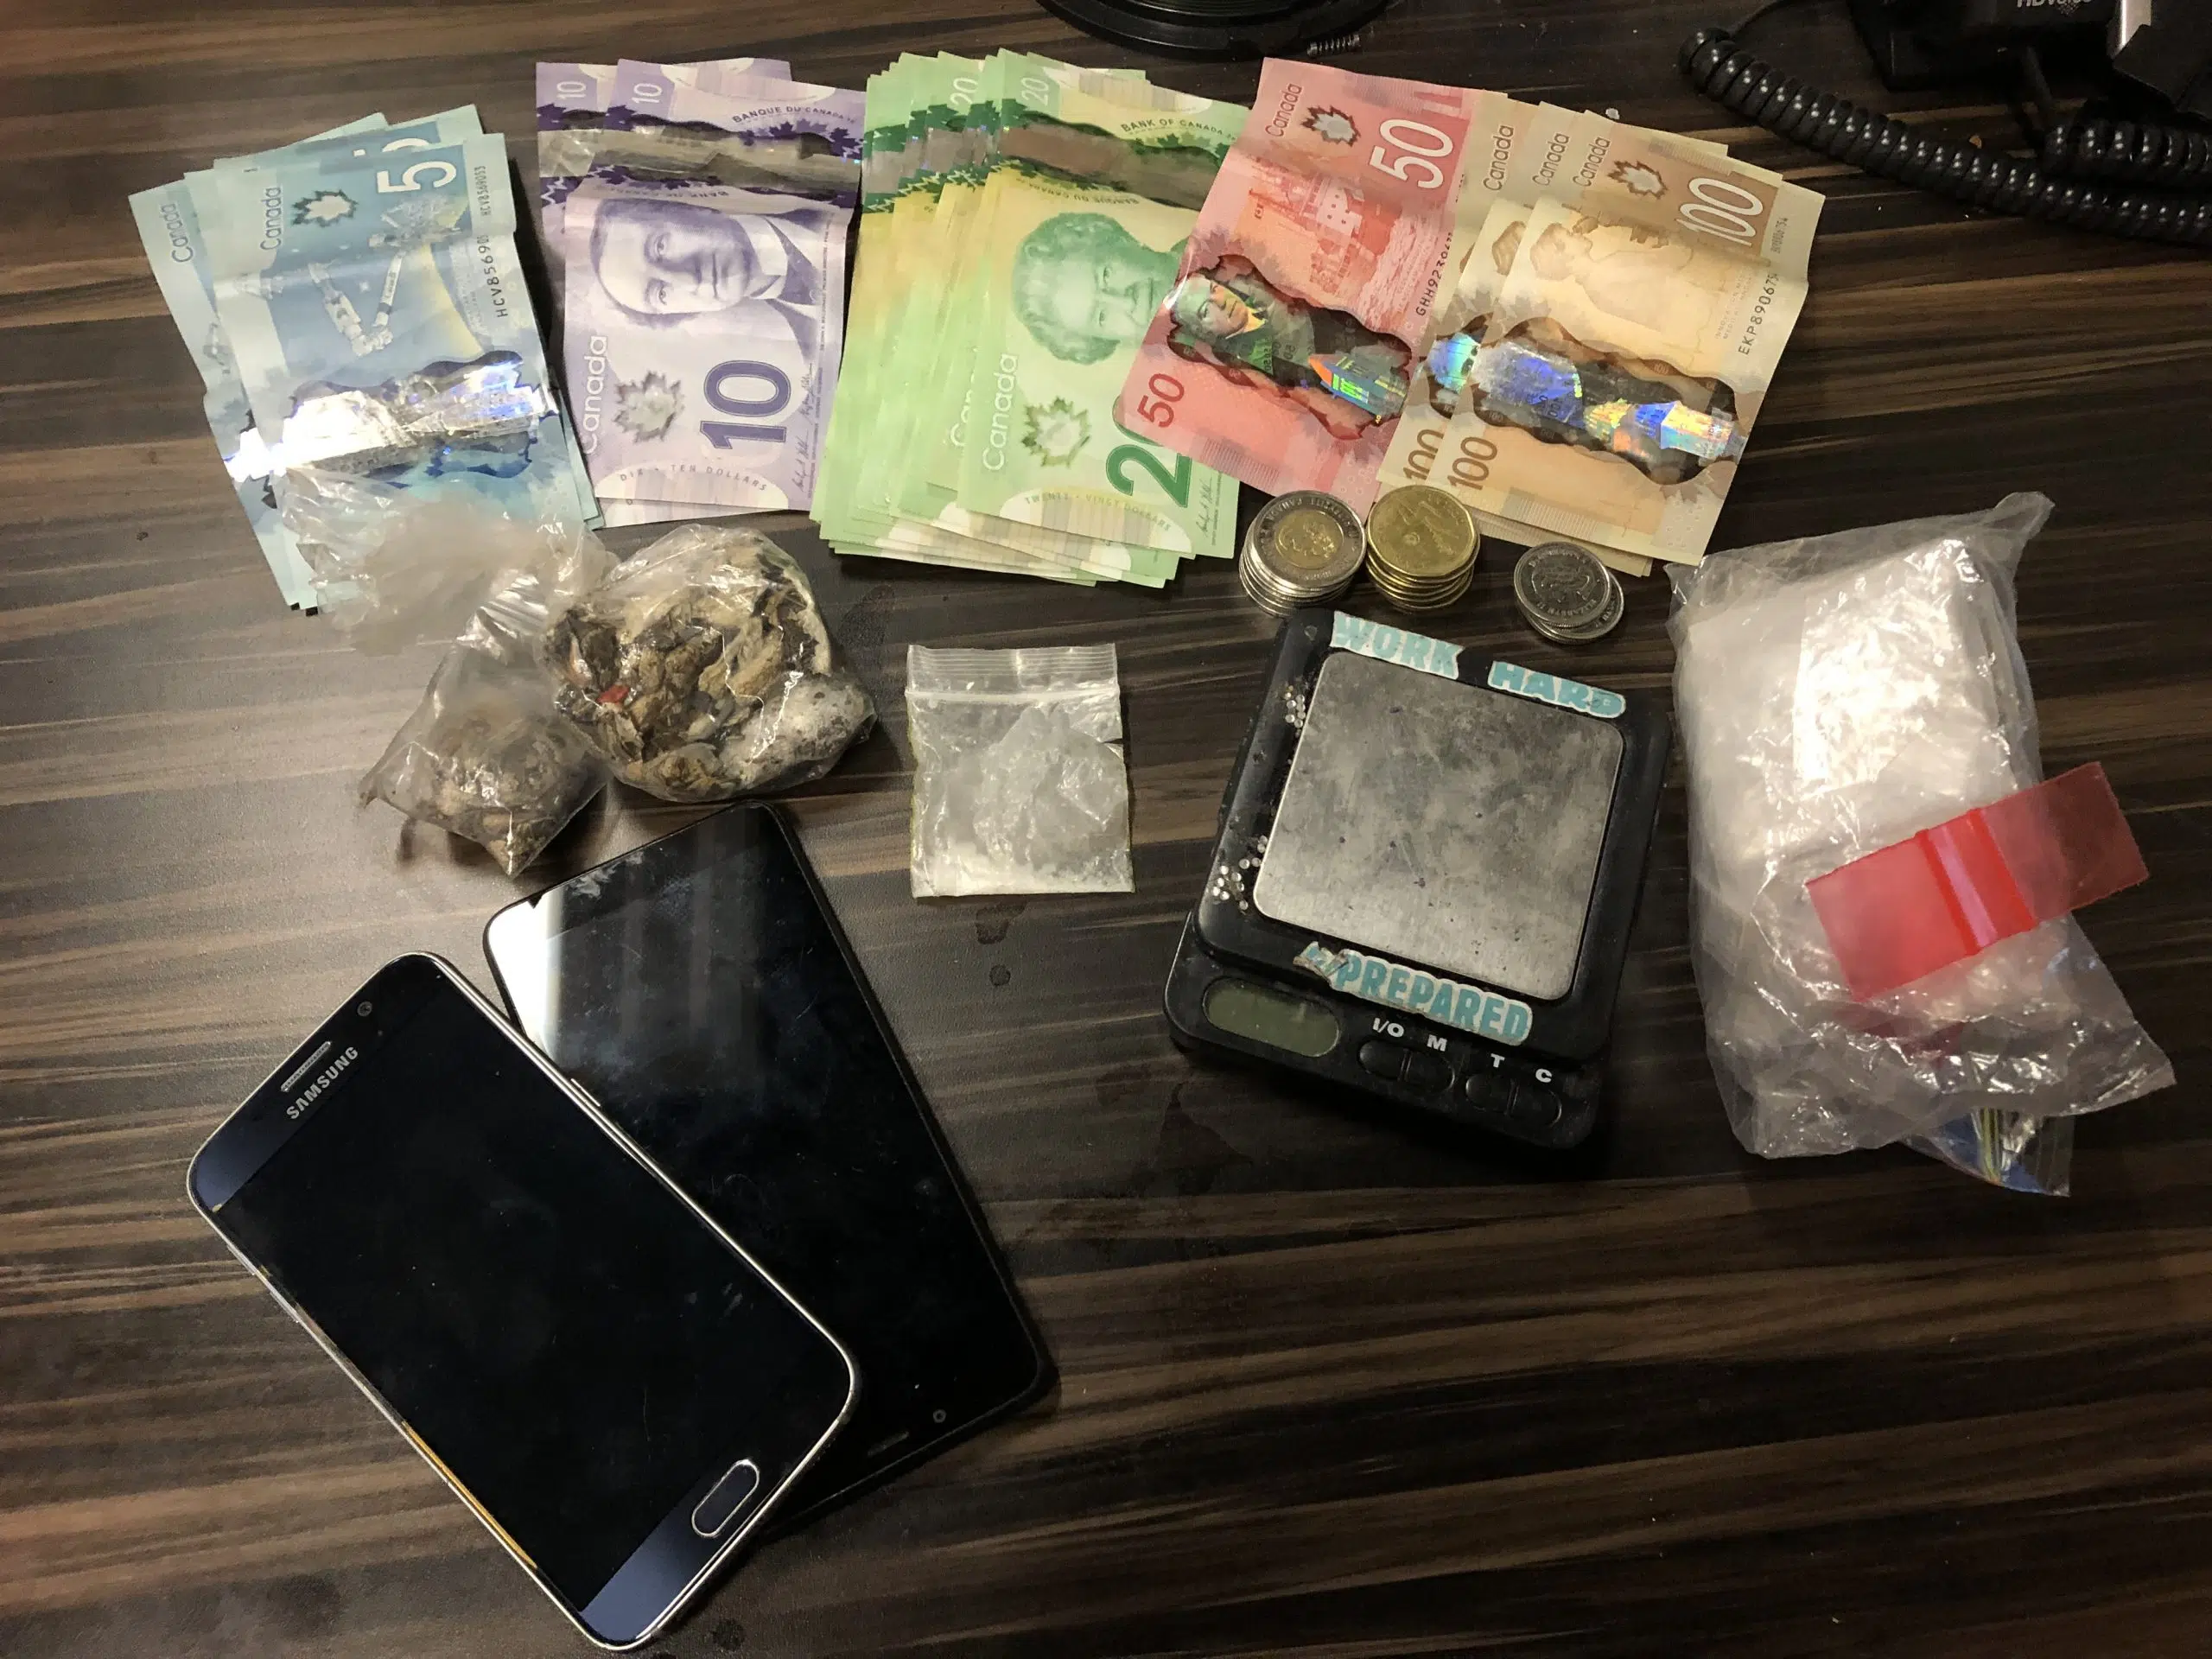 Numerous charges laid in Cobourg drug investigation